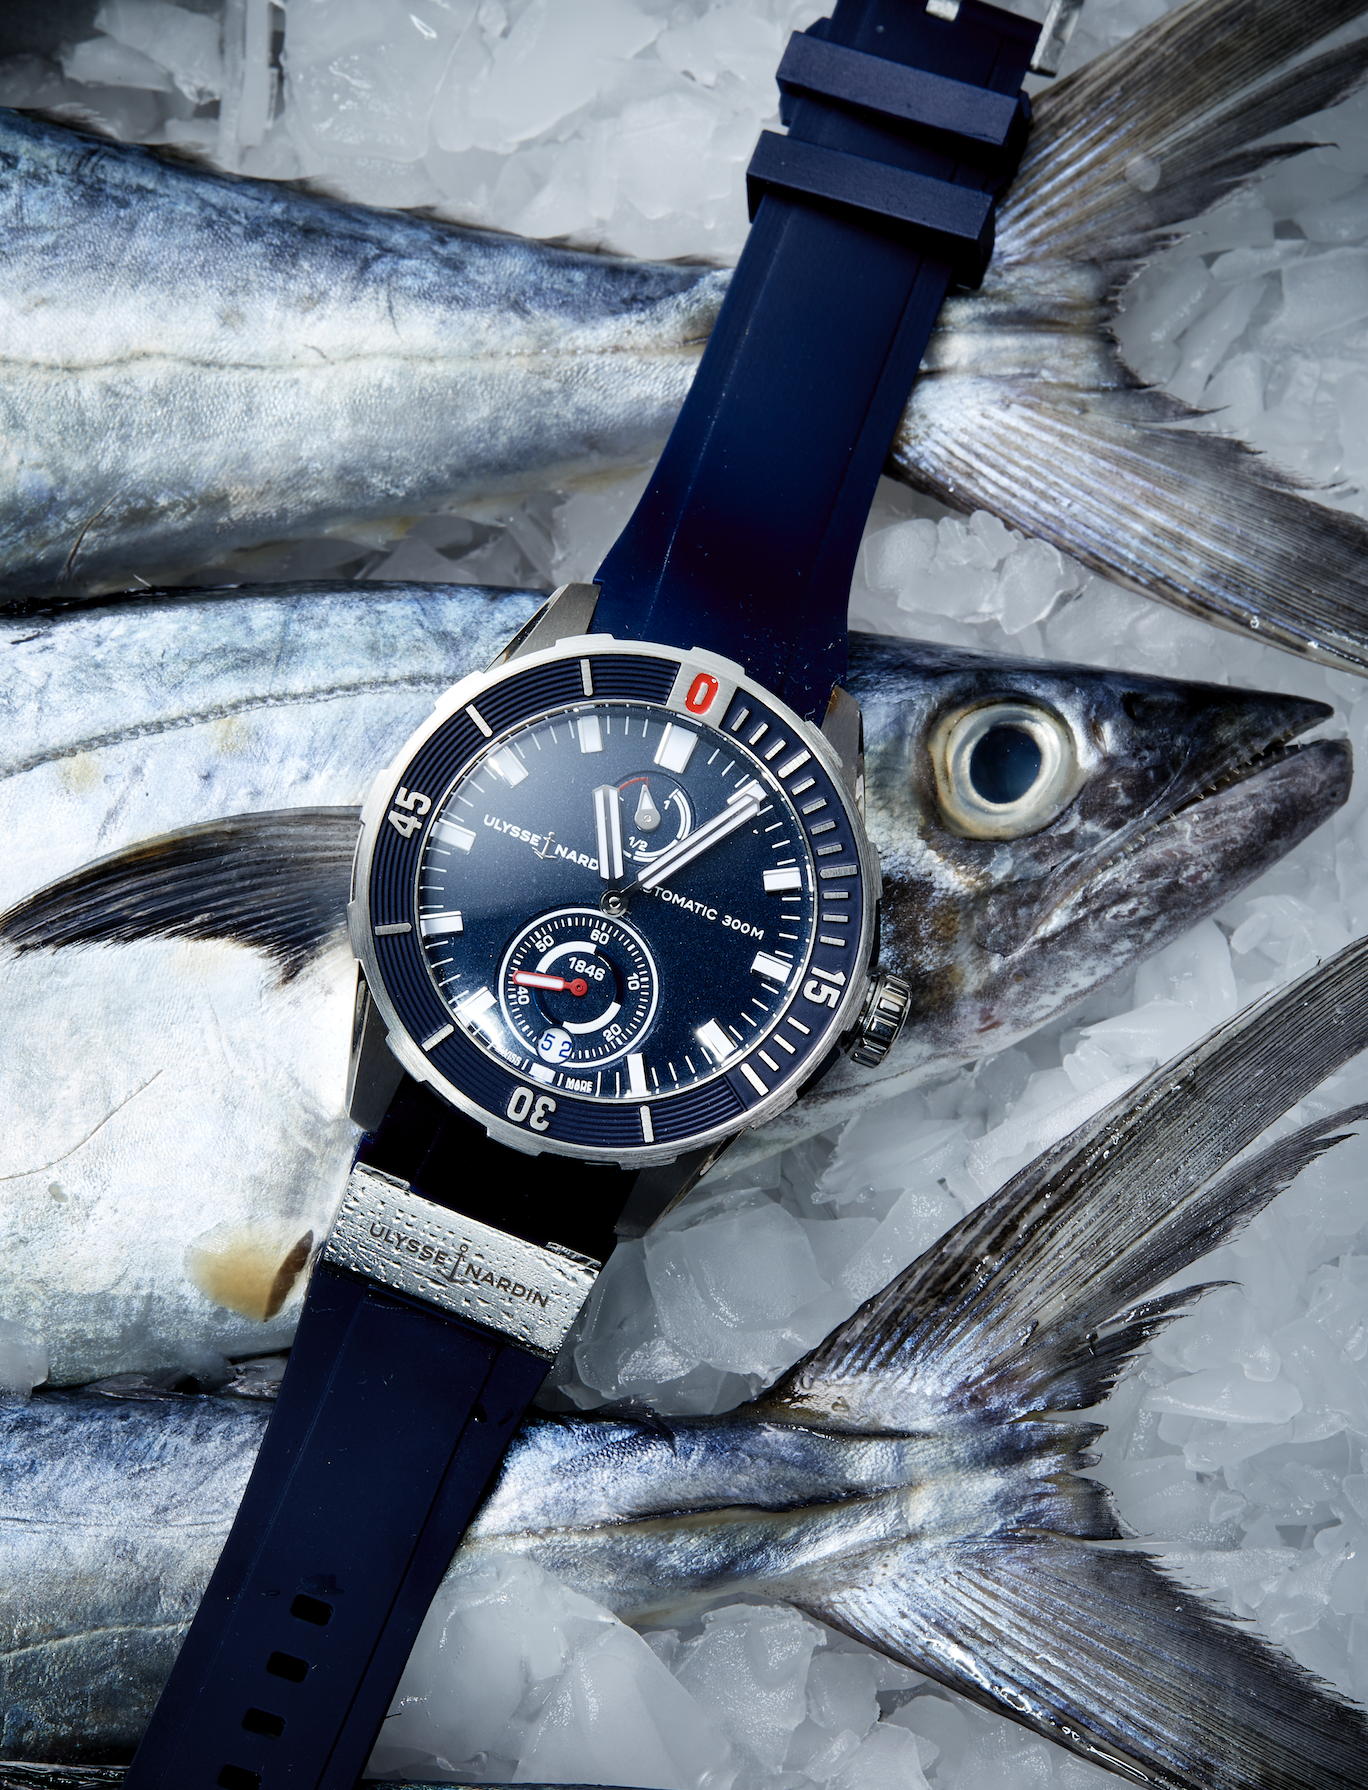 Ulysse Nardin: All Models & Prices (Buying Guide)